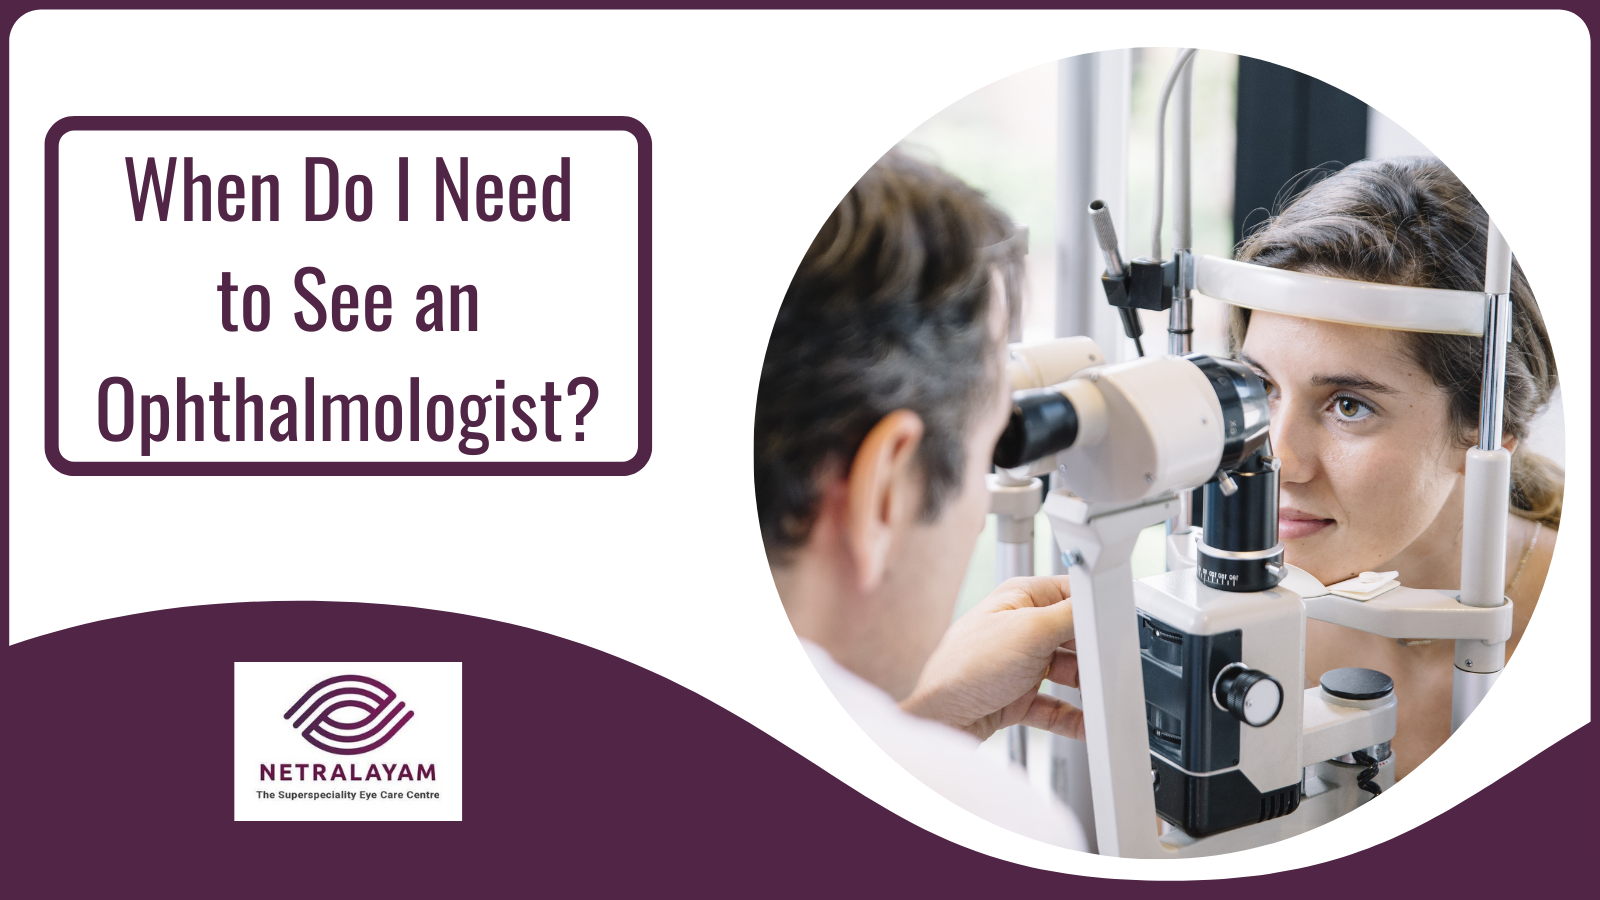 When Do I Need to See an Ophthalmologist?